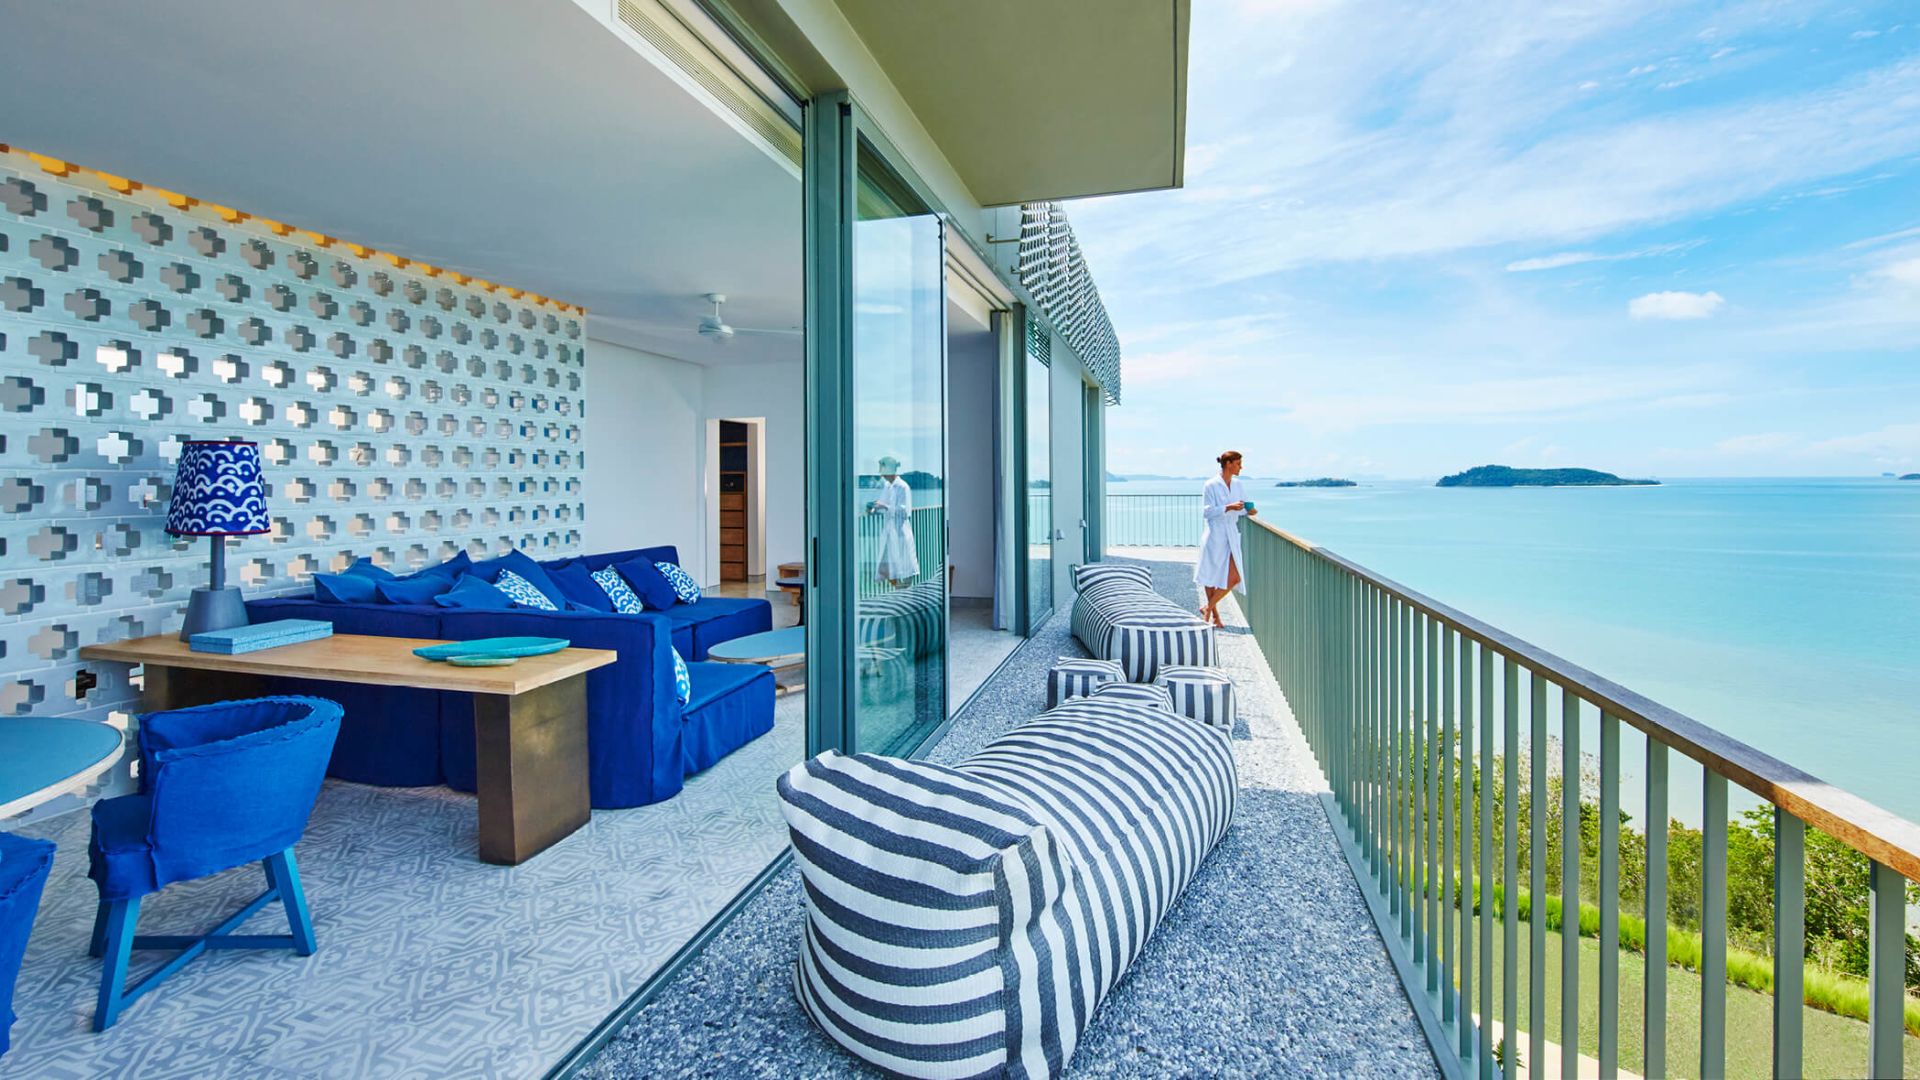 Spacious outdoor deck overlooking the Andaman Sea - Image